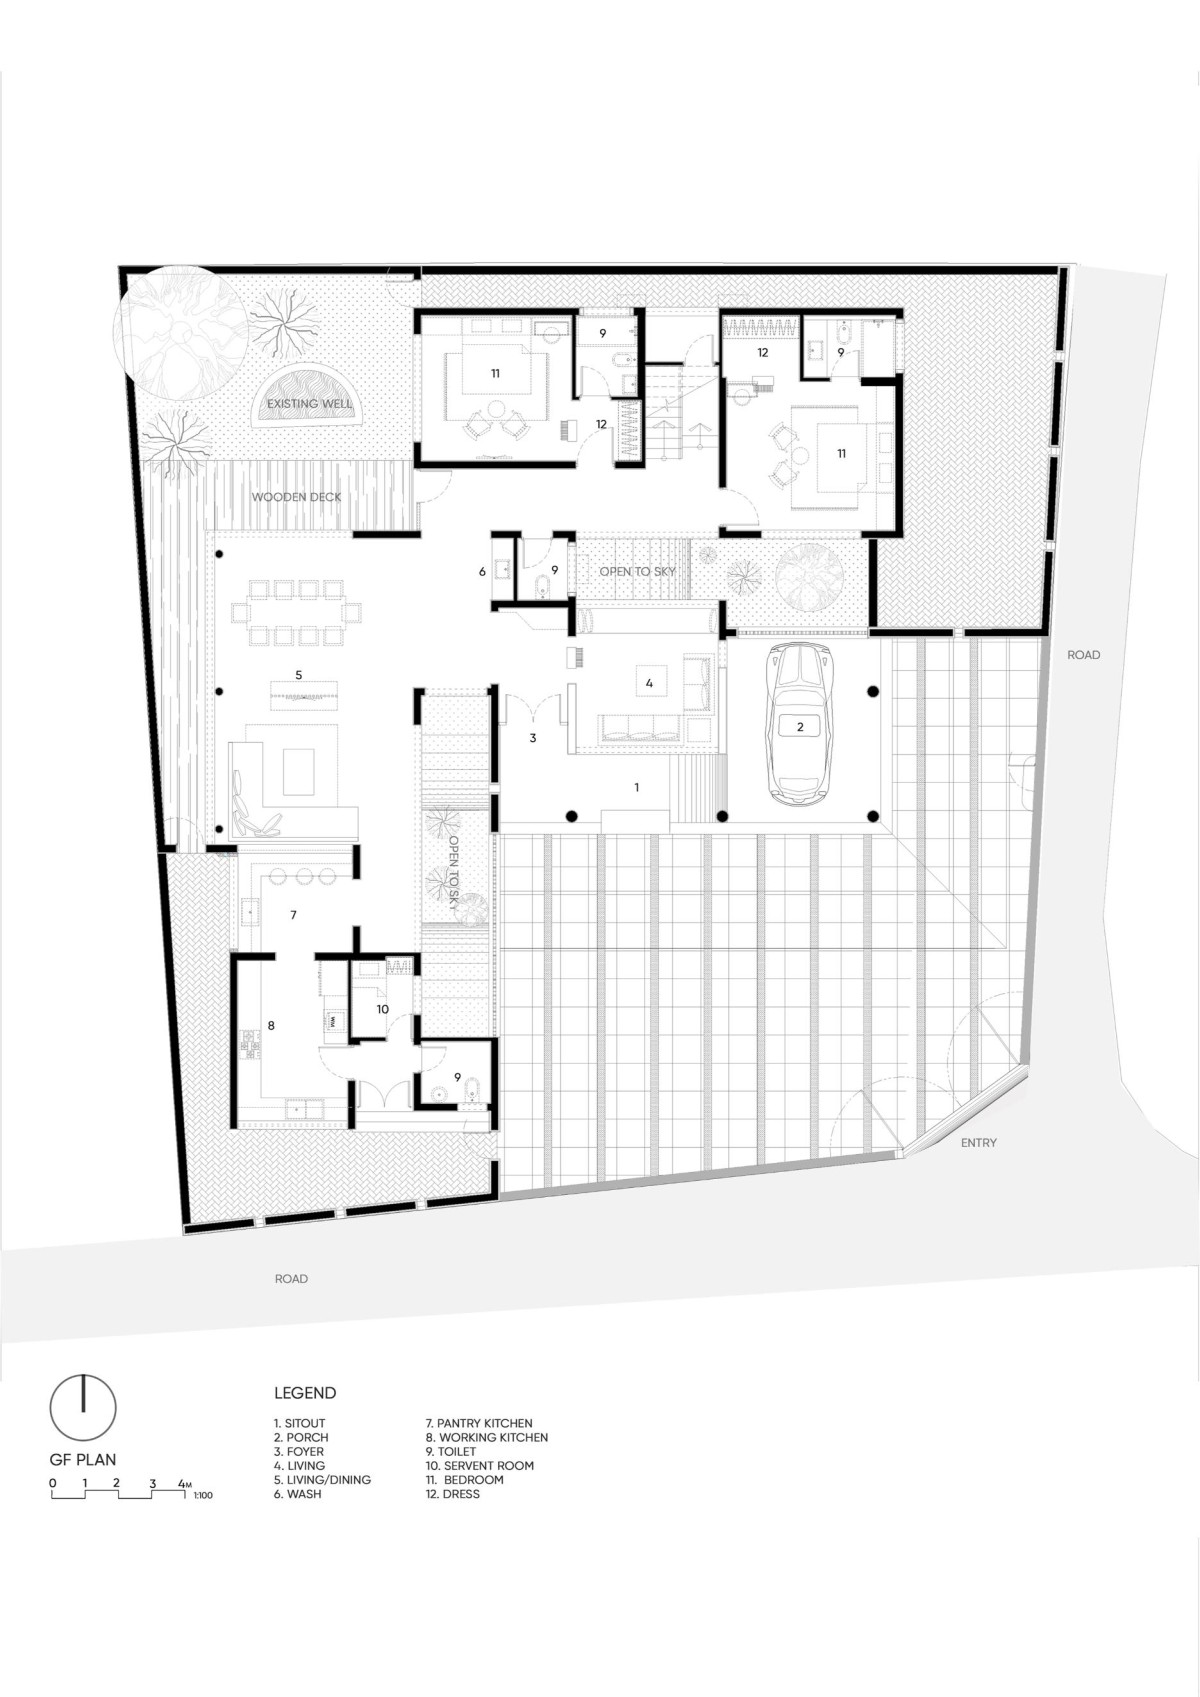 Ground floor plan of Sanctum of Solace by SOHO Architects